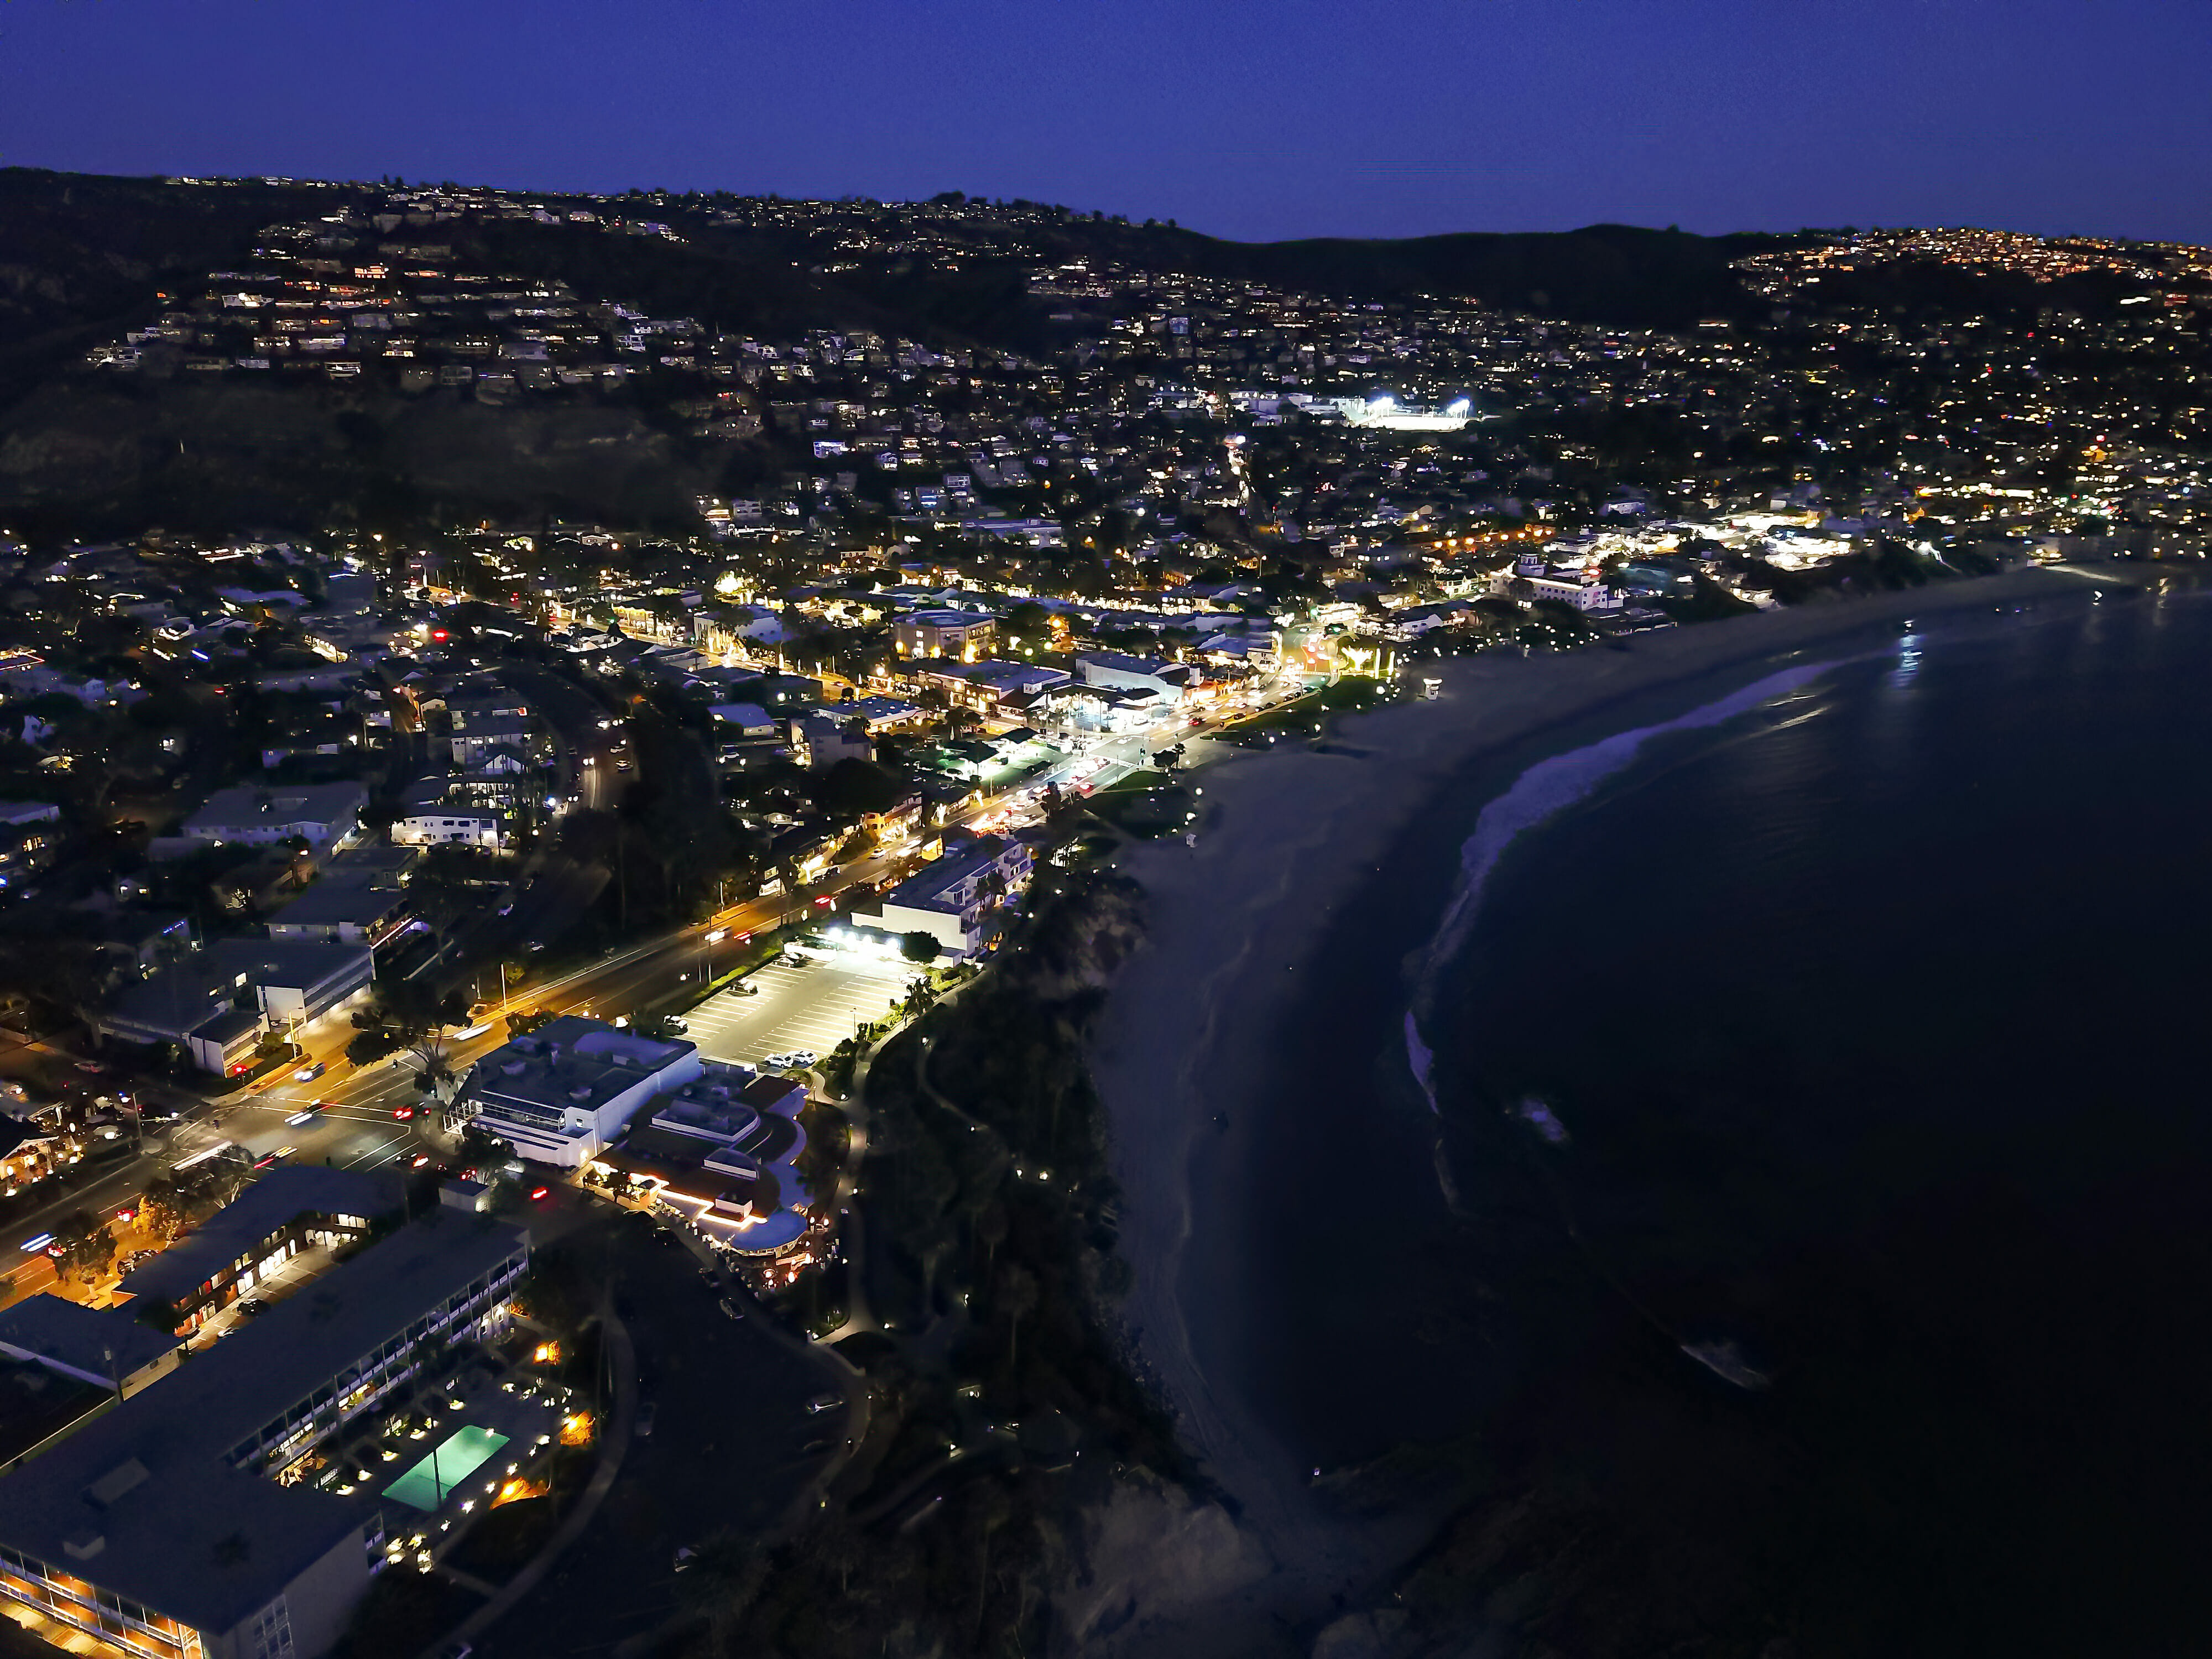 A breathtaking aerial view of the beach and city at night, showcasing the mesmerizing beauty of the illuminated coastline